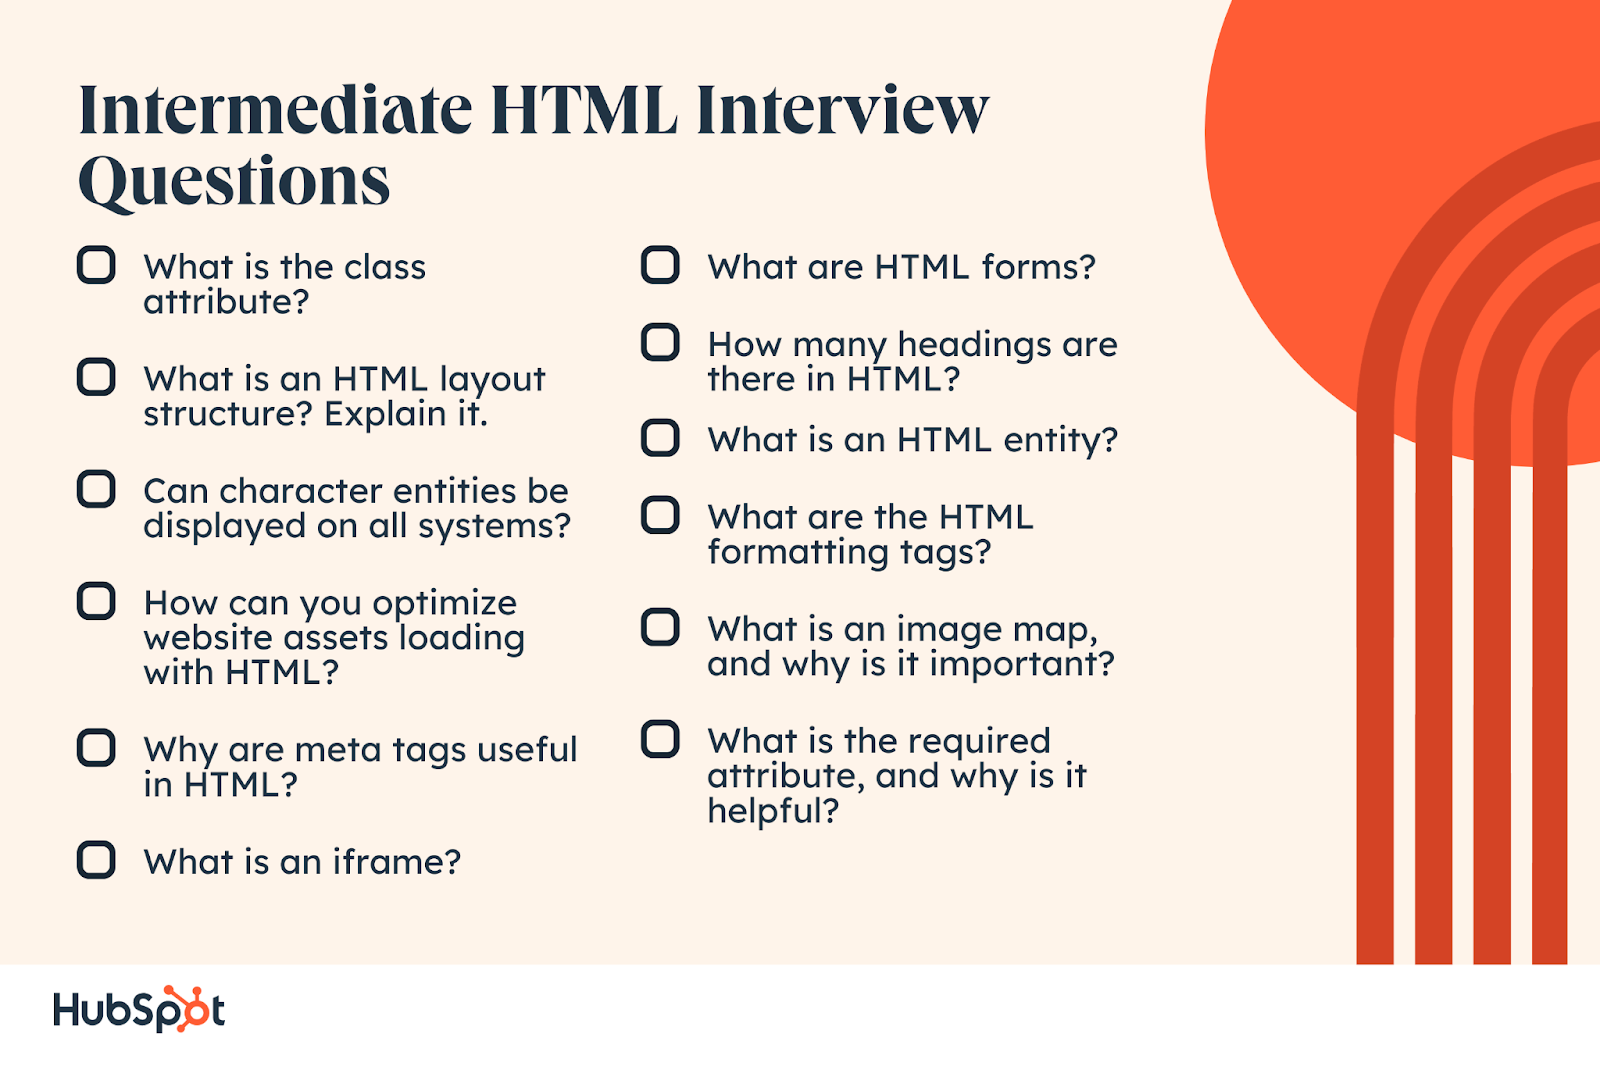 Intermediate HTML Interview Questions What is the class attribute? What is an HTML layout structure? Explain it. Can character entities be displayed on all systems? How can you optimize website assets loading with HTML? Why are meta tags useful in HTML? What is an iframe? What are HTML forms? How many headings are there in HTML? What is an HTML entity? What are the HTML formatting tags? What is an image map, and why is it important? What is the required attribute, and why is it helpful?